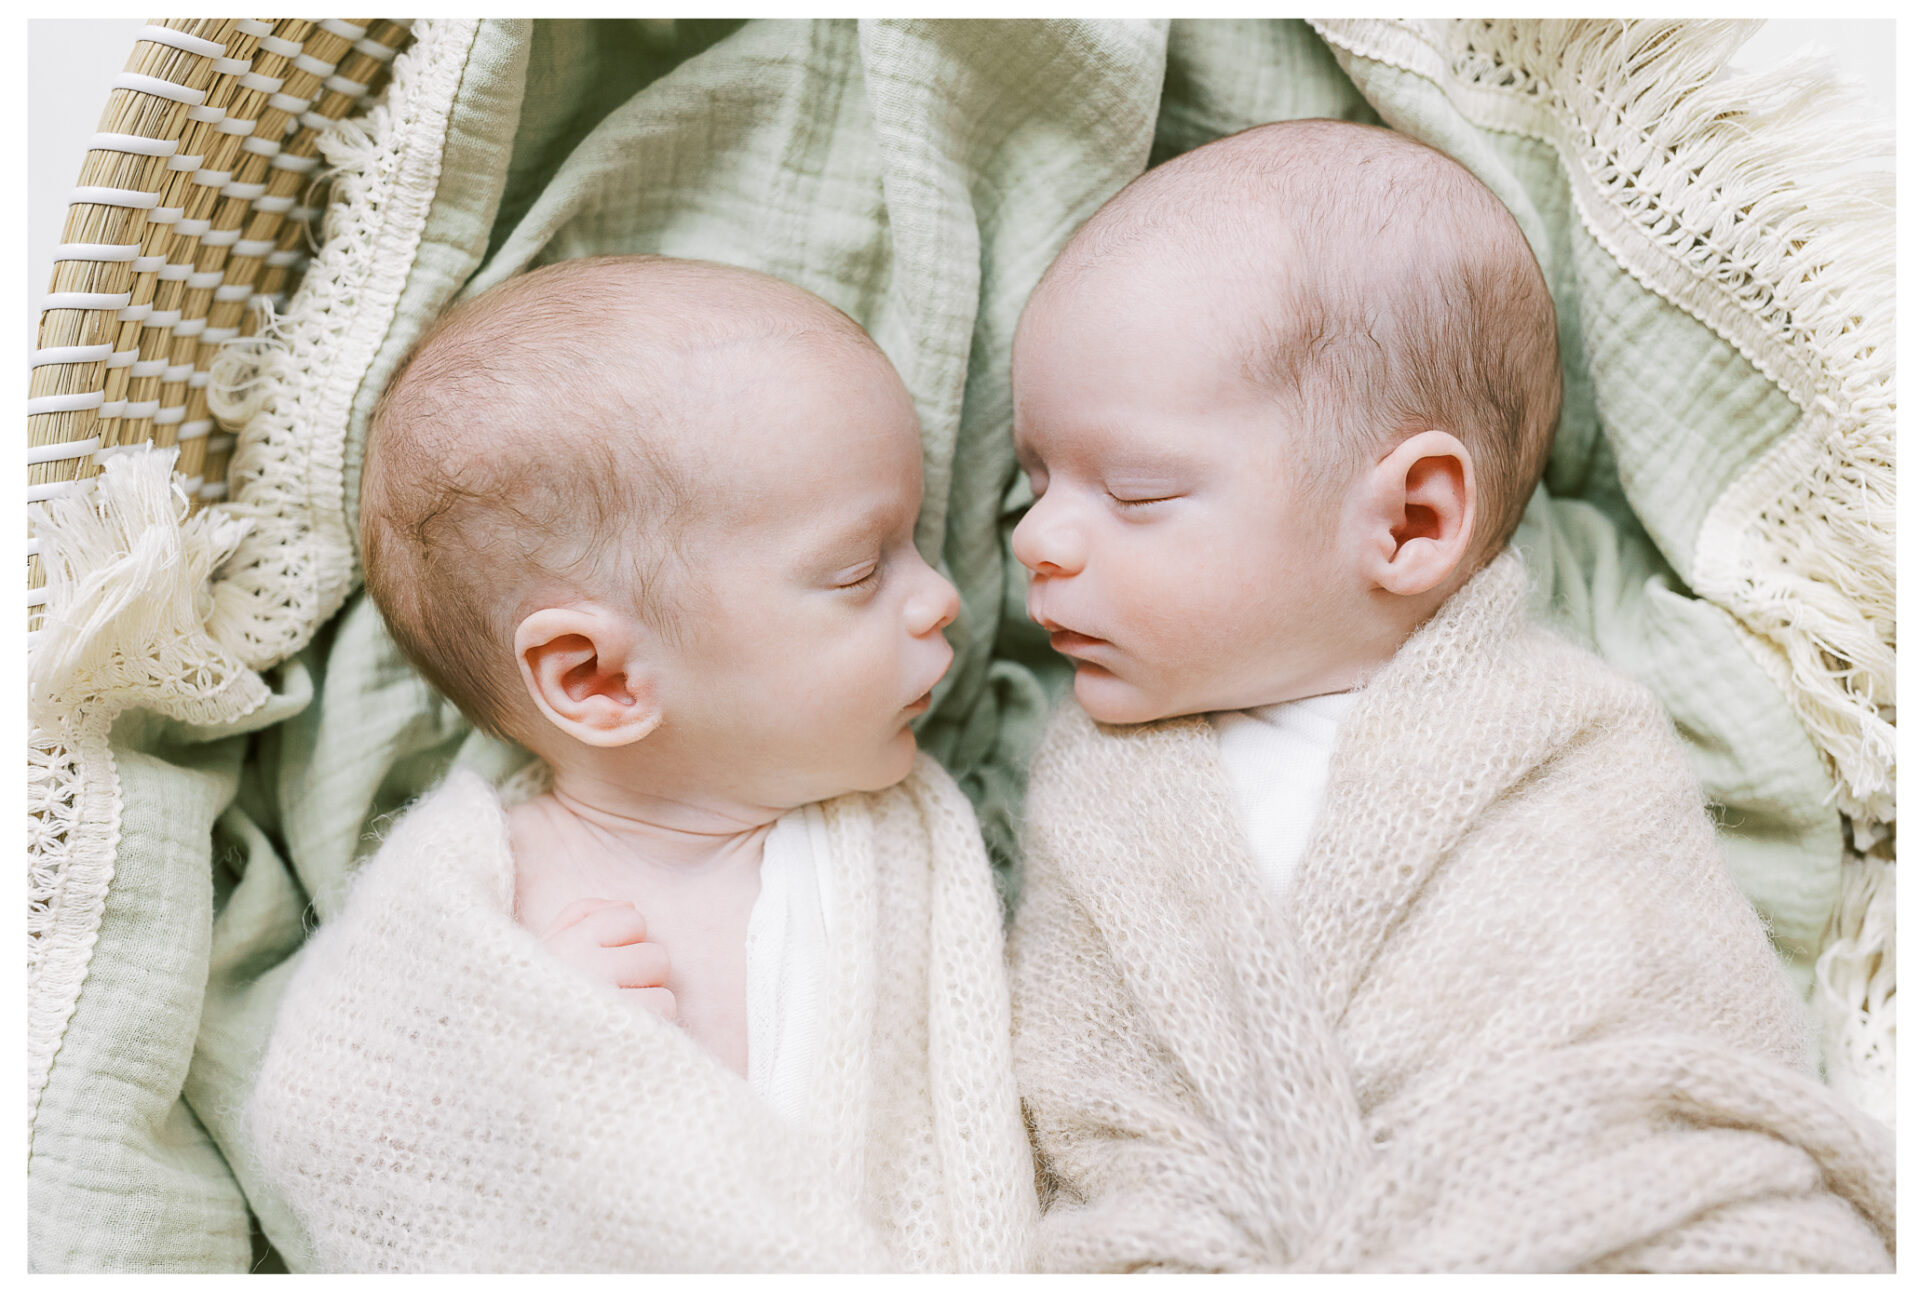 Newborn baby boys swaddled and snuggled together in a cozy basket sleeping | Twin newborn sessions are extra sweet because the bond between womb-mates encompasses the most beautiful organic connection, one that starts from the very beginning and lasts a lifetime.